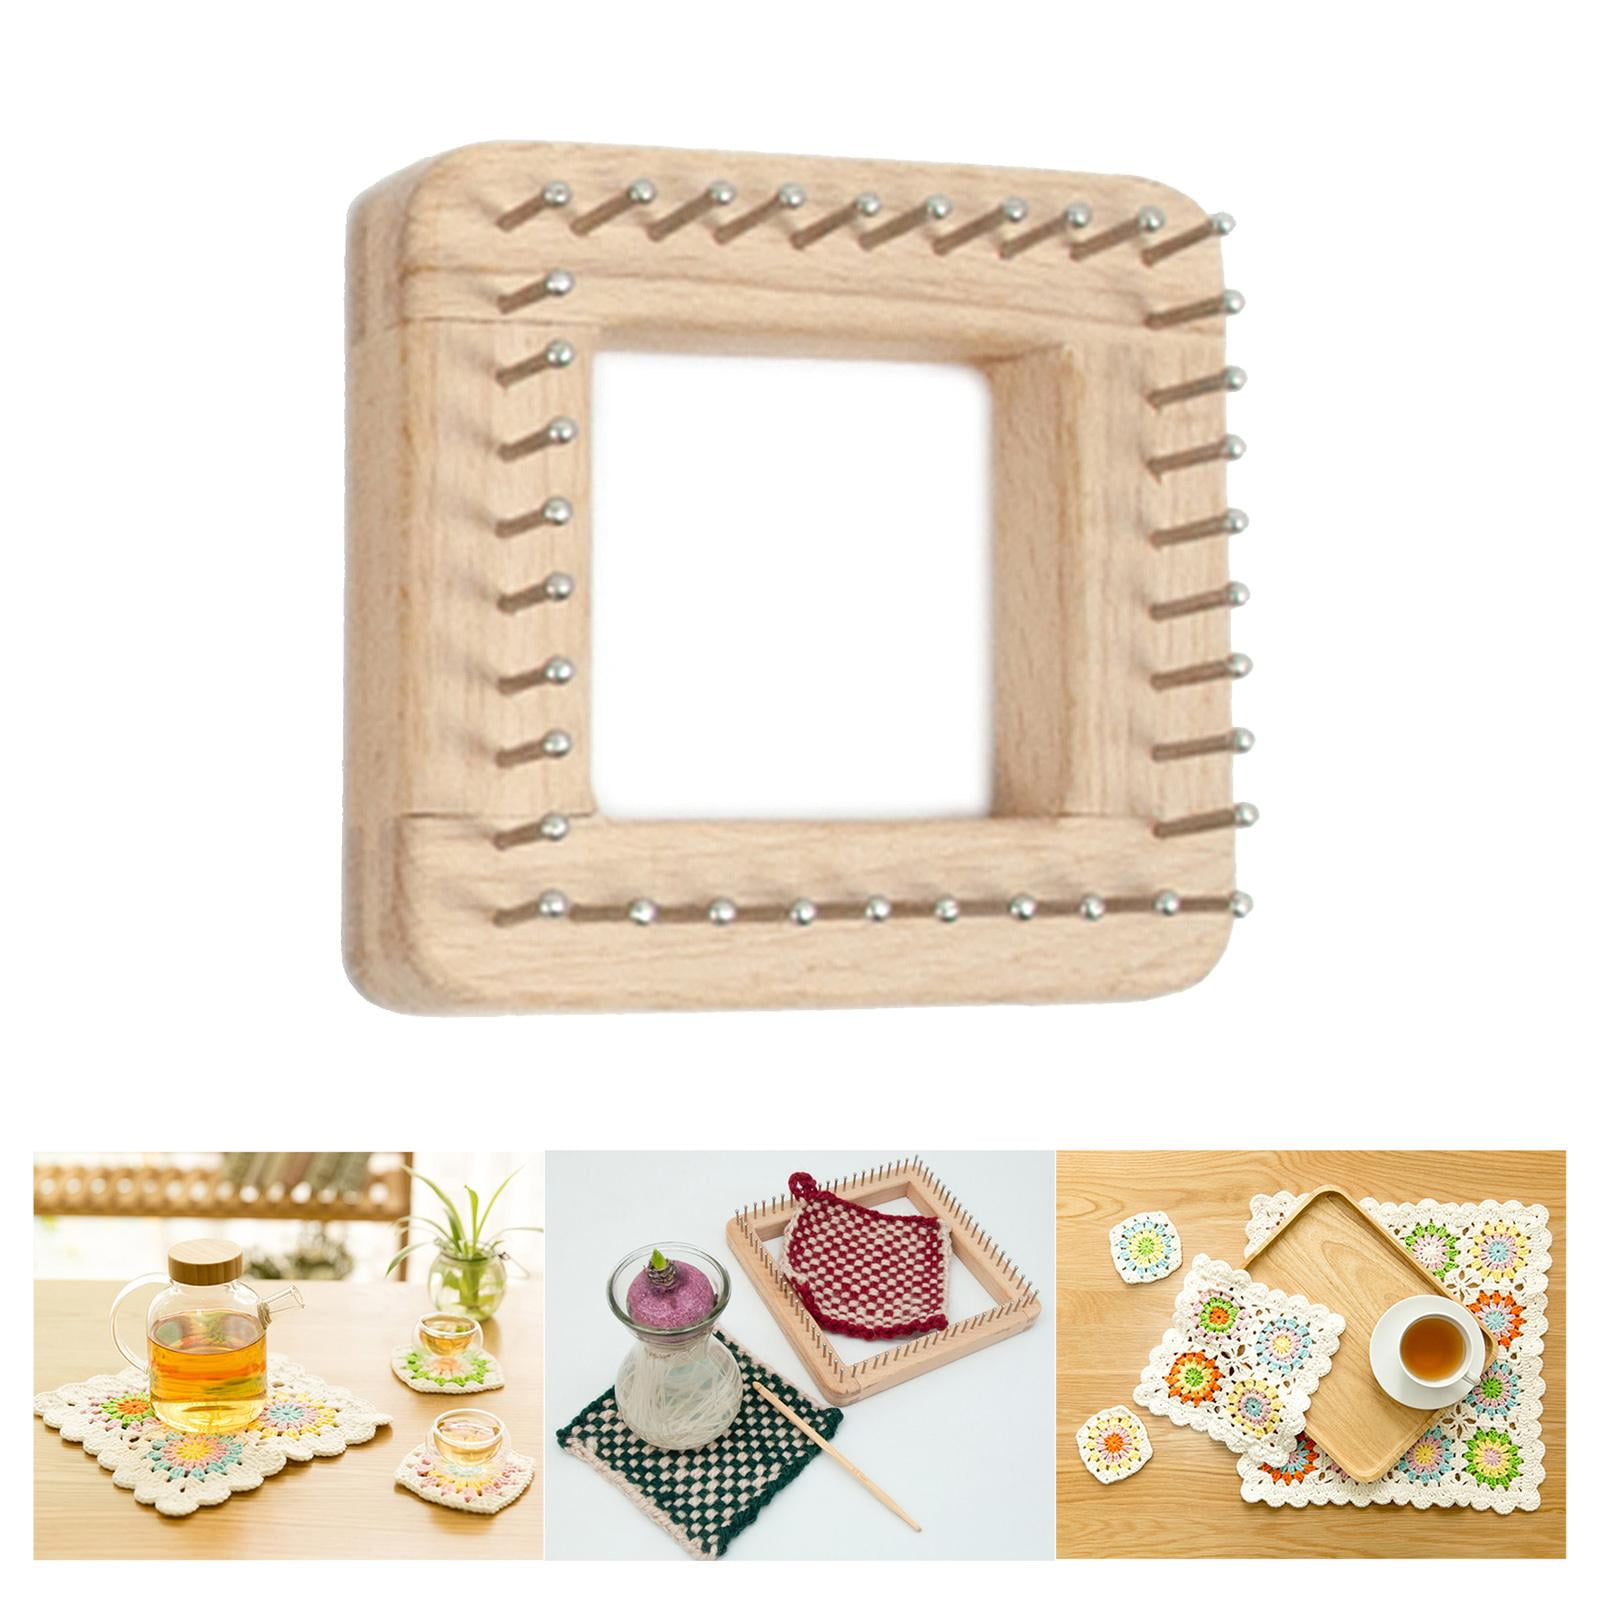 Wholesale CHGCRAFT 1 Set Square Wooden Weaving Loom Wood Spool Knitting Loom  with Hook Safe Knitting Loom Practical for Hat Scarf Sweater Knitting Loom  Accessories 